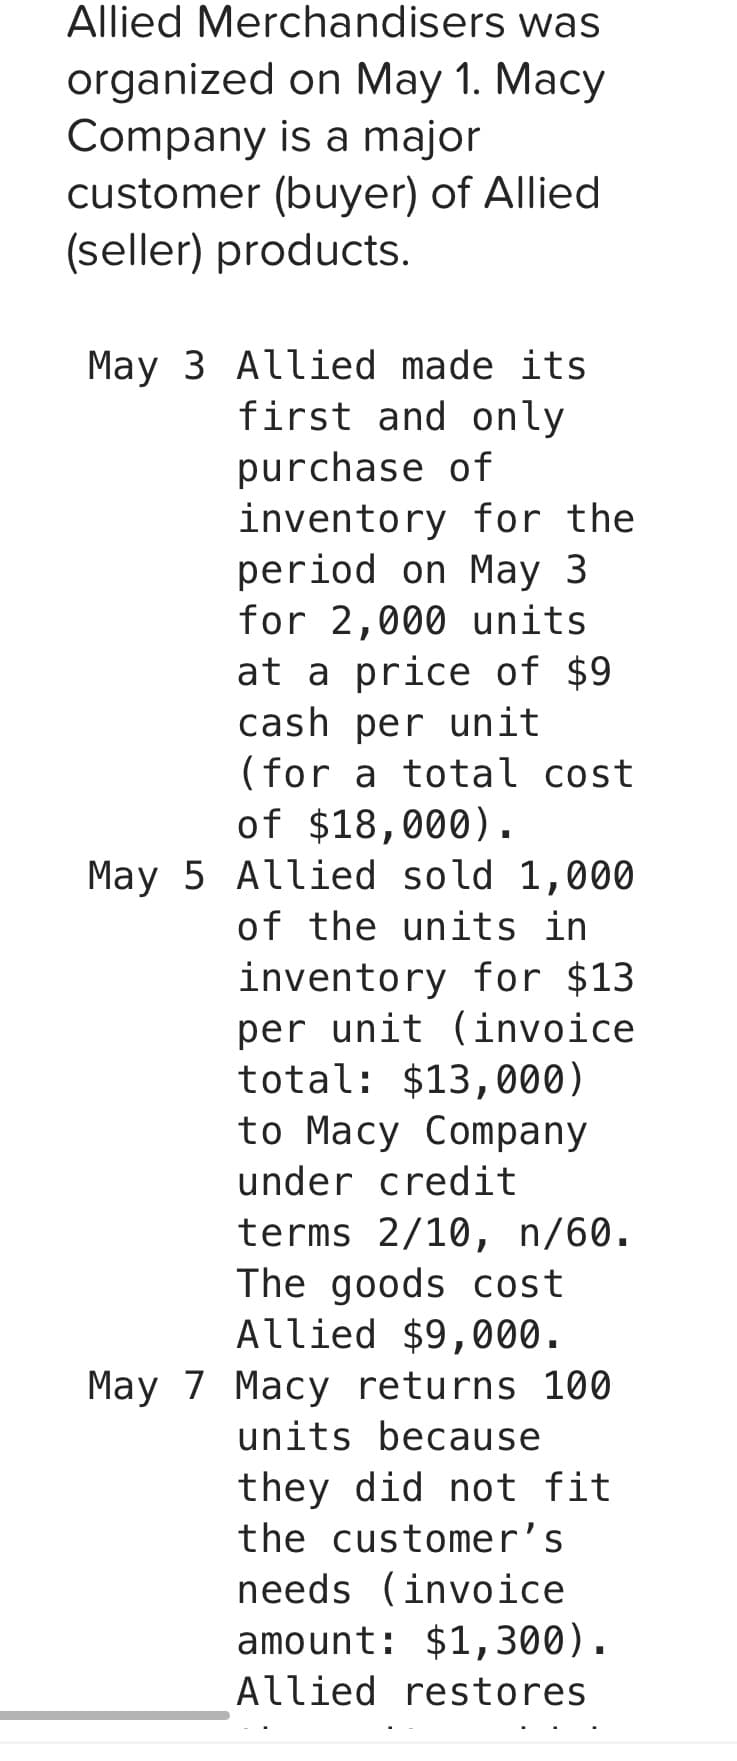 Allied Merchandisers was
organized
on May 1. Macy
is a major
Company
customer (buyer) of Allied
(seller) products.
May 3 Allied made its
first and only
purchase of
inventory for the
period on May 3
for 2,000 units
at a price of $9
cash per unit
(for a total cost
of $18,000).
May 5 Allied sold 1,000
of the units in
inventory for $13.
per unit (invoice
total: $13,000)
to Macy Company
under credit
terms 2/10, n/60.
The goods cost
Allied $9,000.
May 7 Macy returns 100
units because
they did not fit
the customer's
needs (invoice
amount: $1,300).
Allied restores